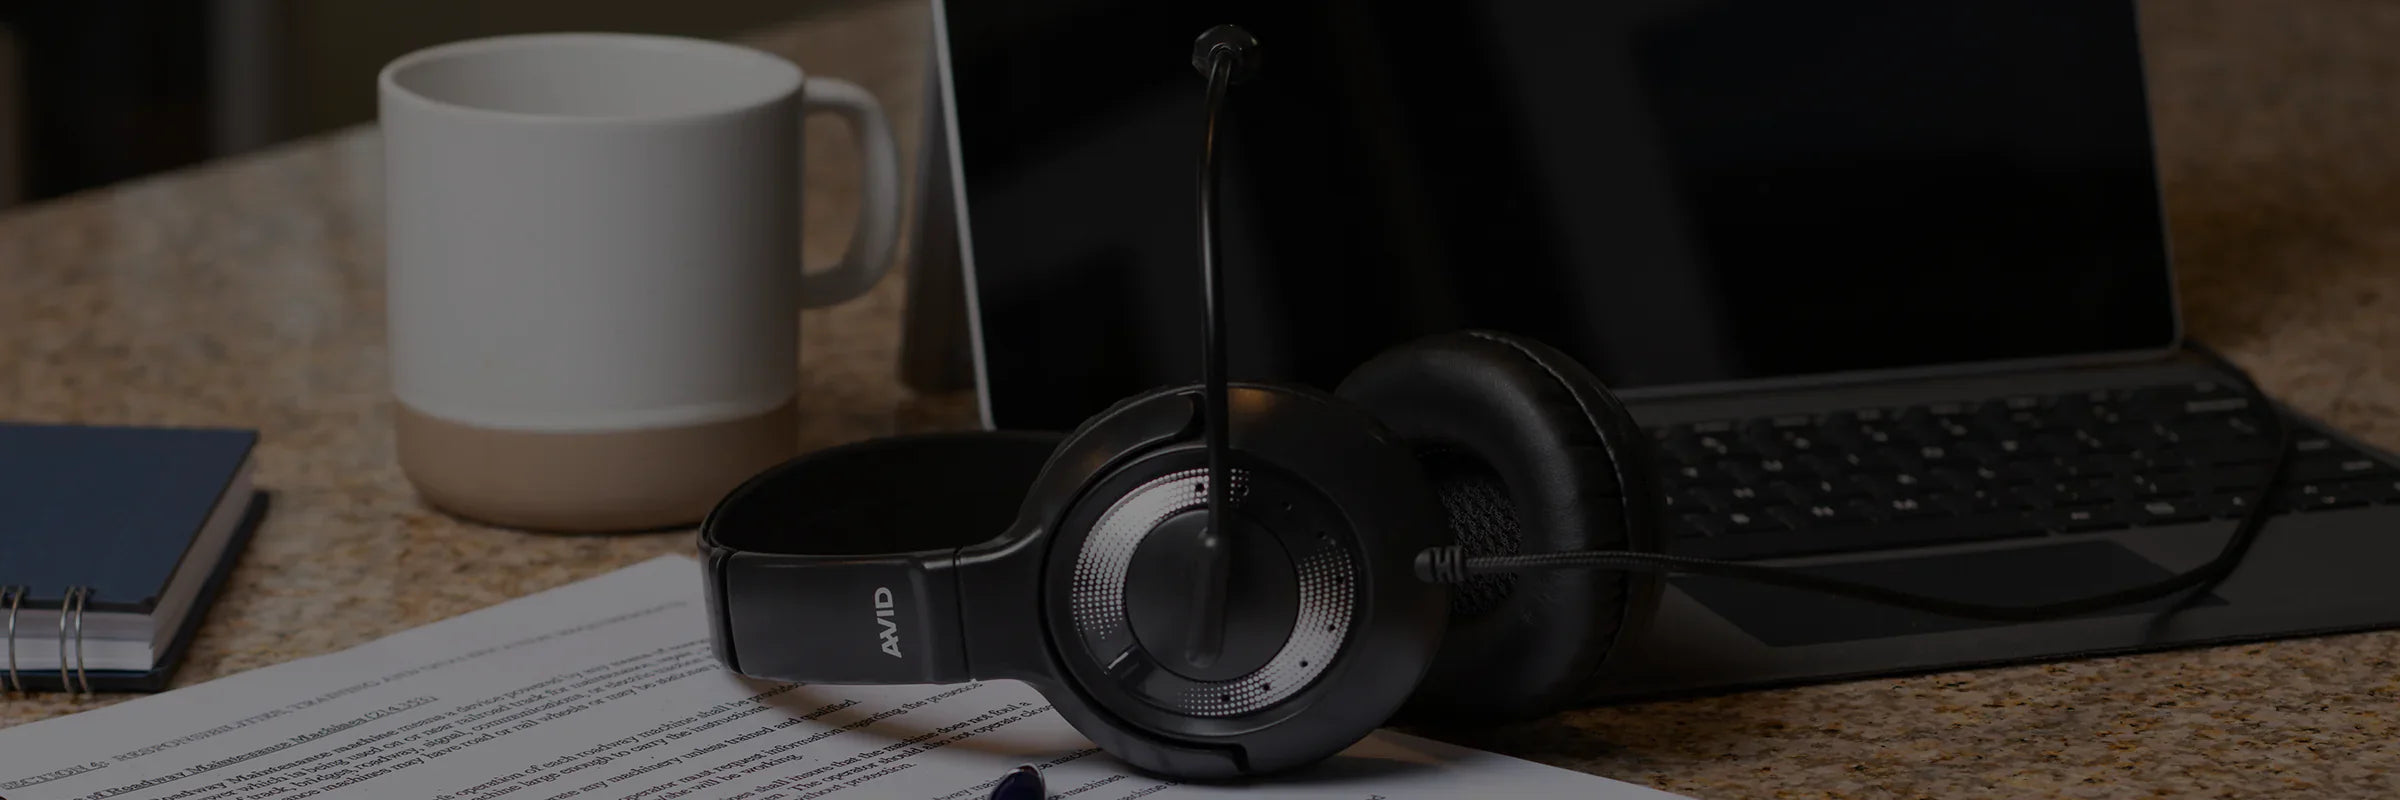 AVID AE-55 Wired Headset with Microphone on a Desk with laptop and coffee